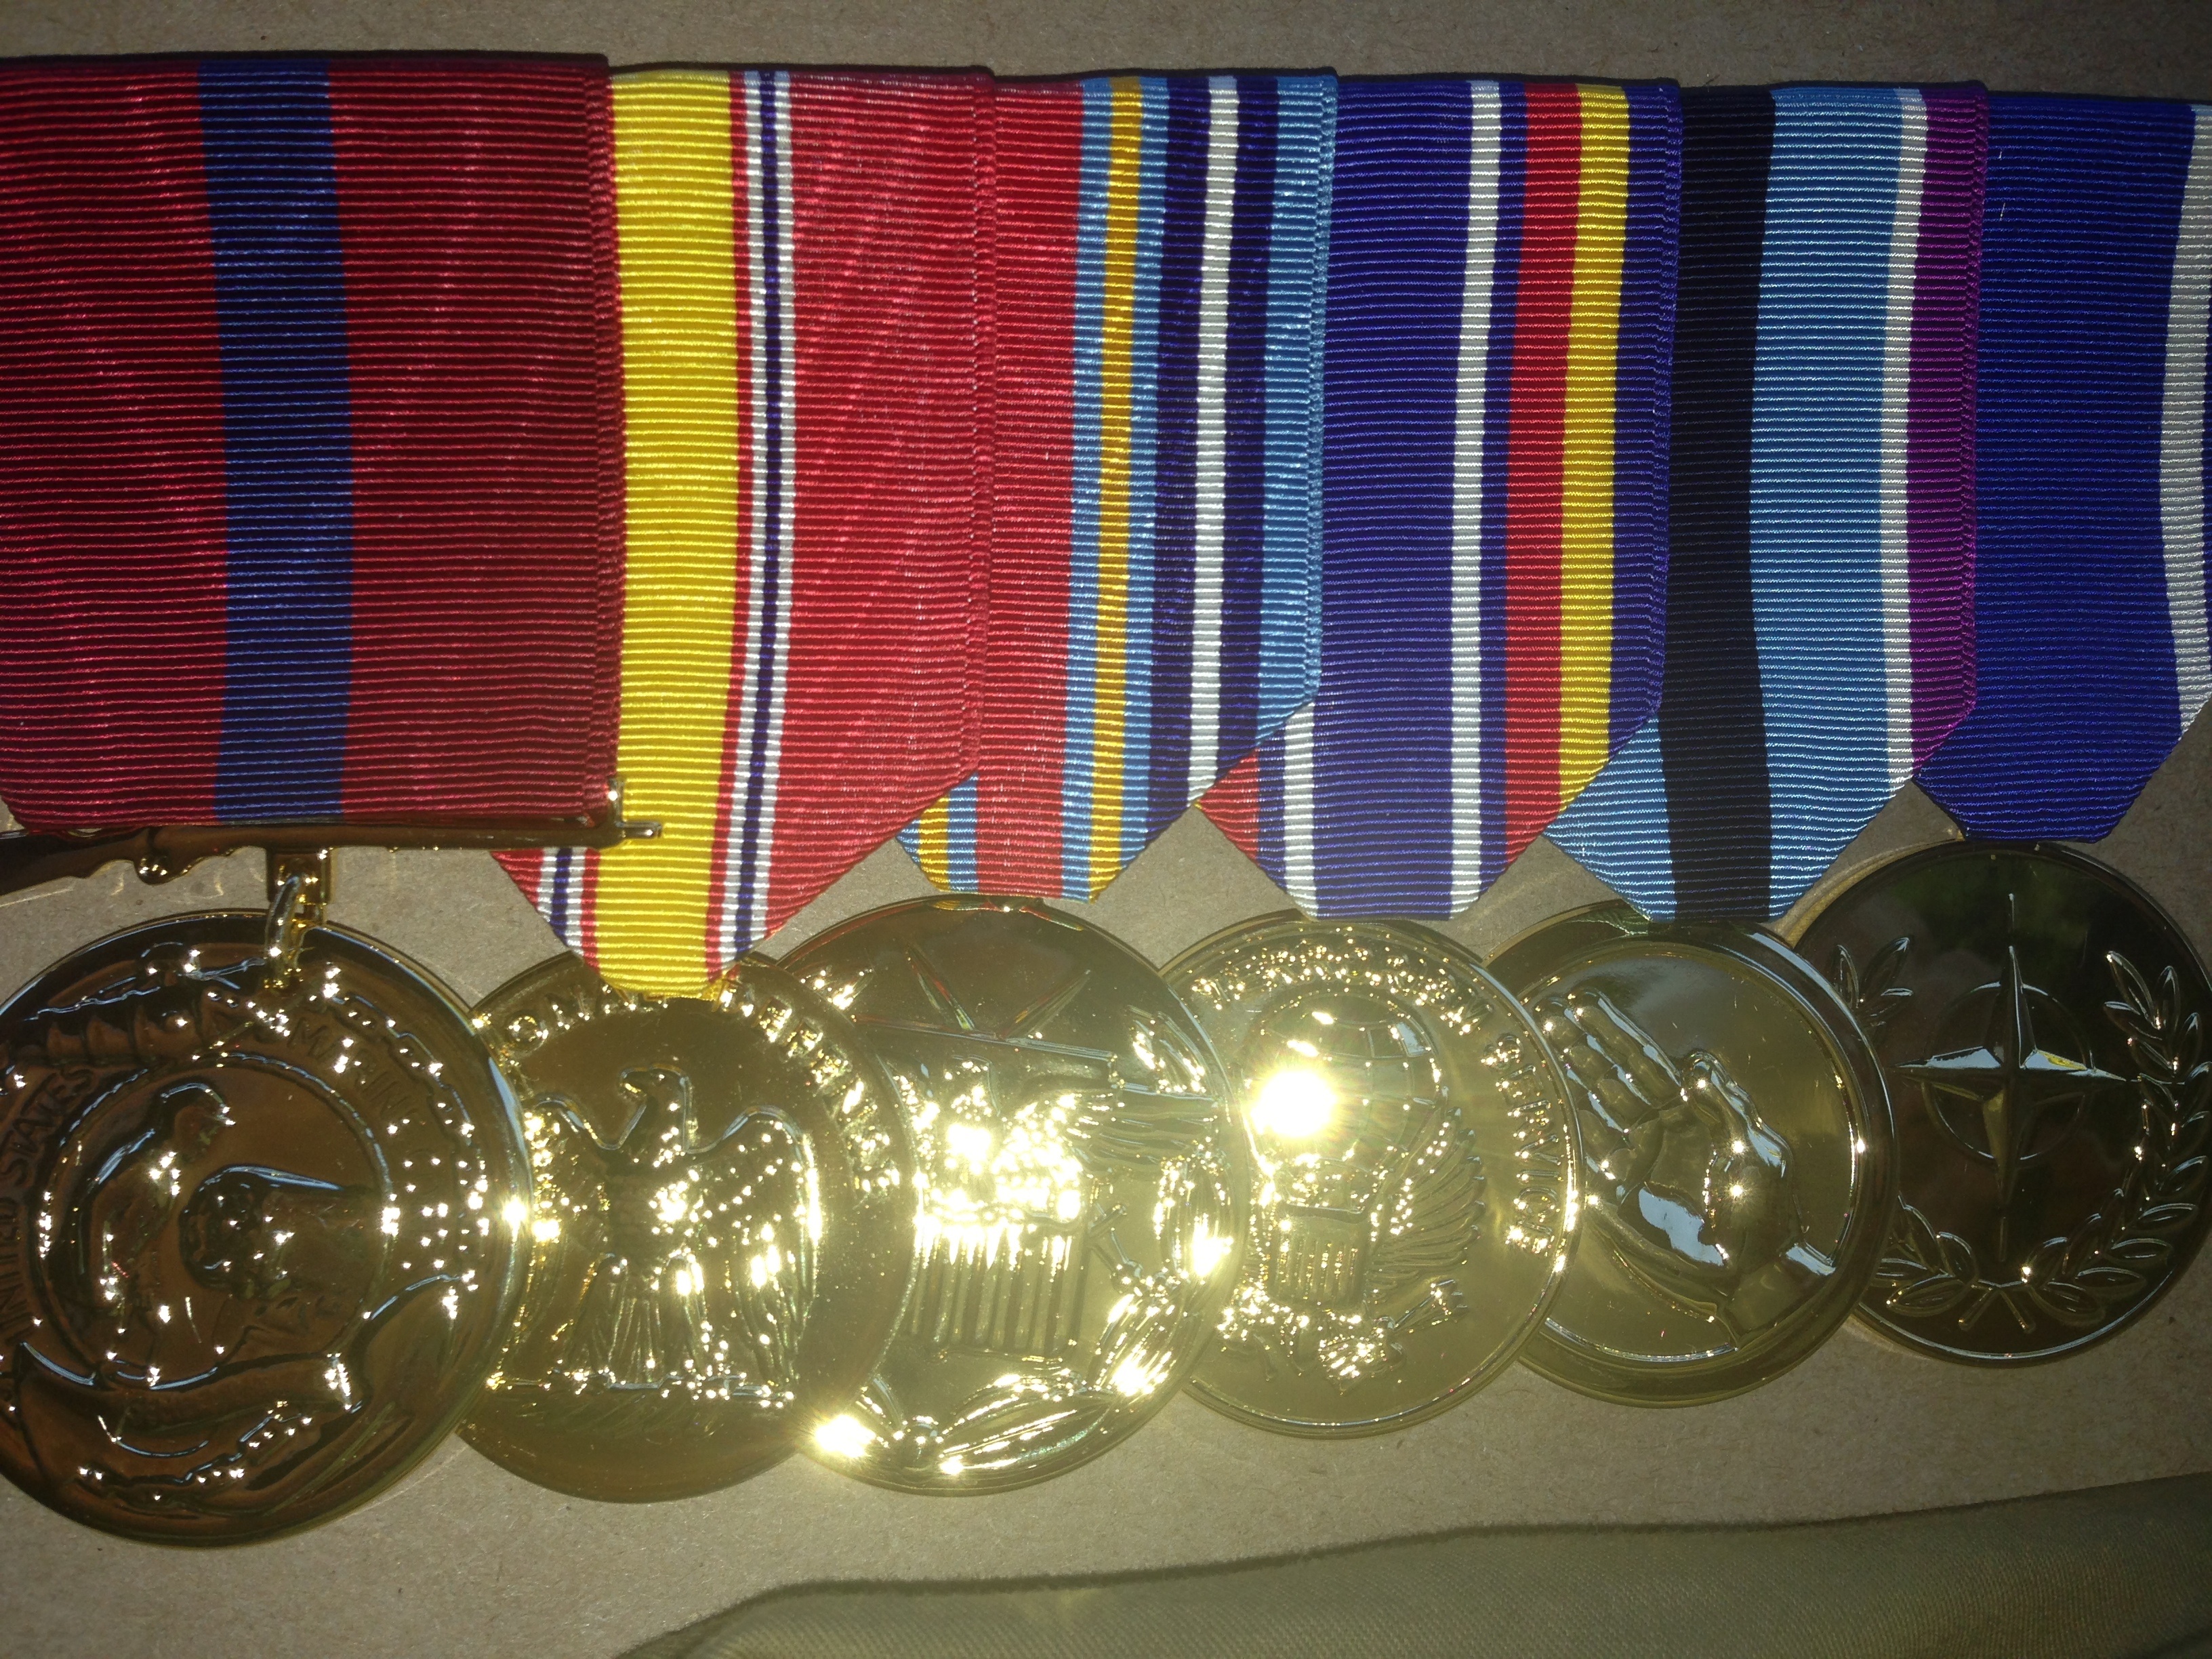 Sgt. Andrew McLaren's military medals earned in Iraq and Liberia.